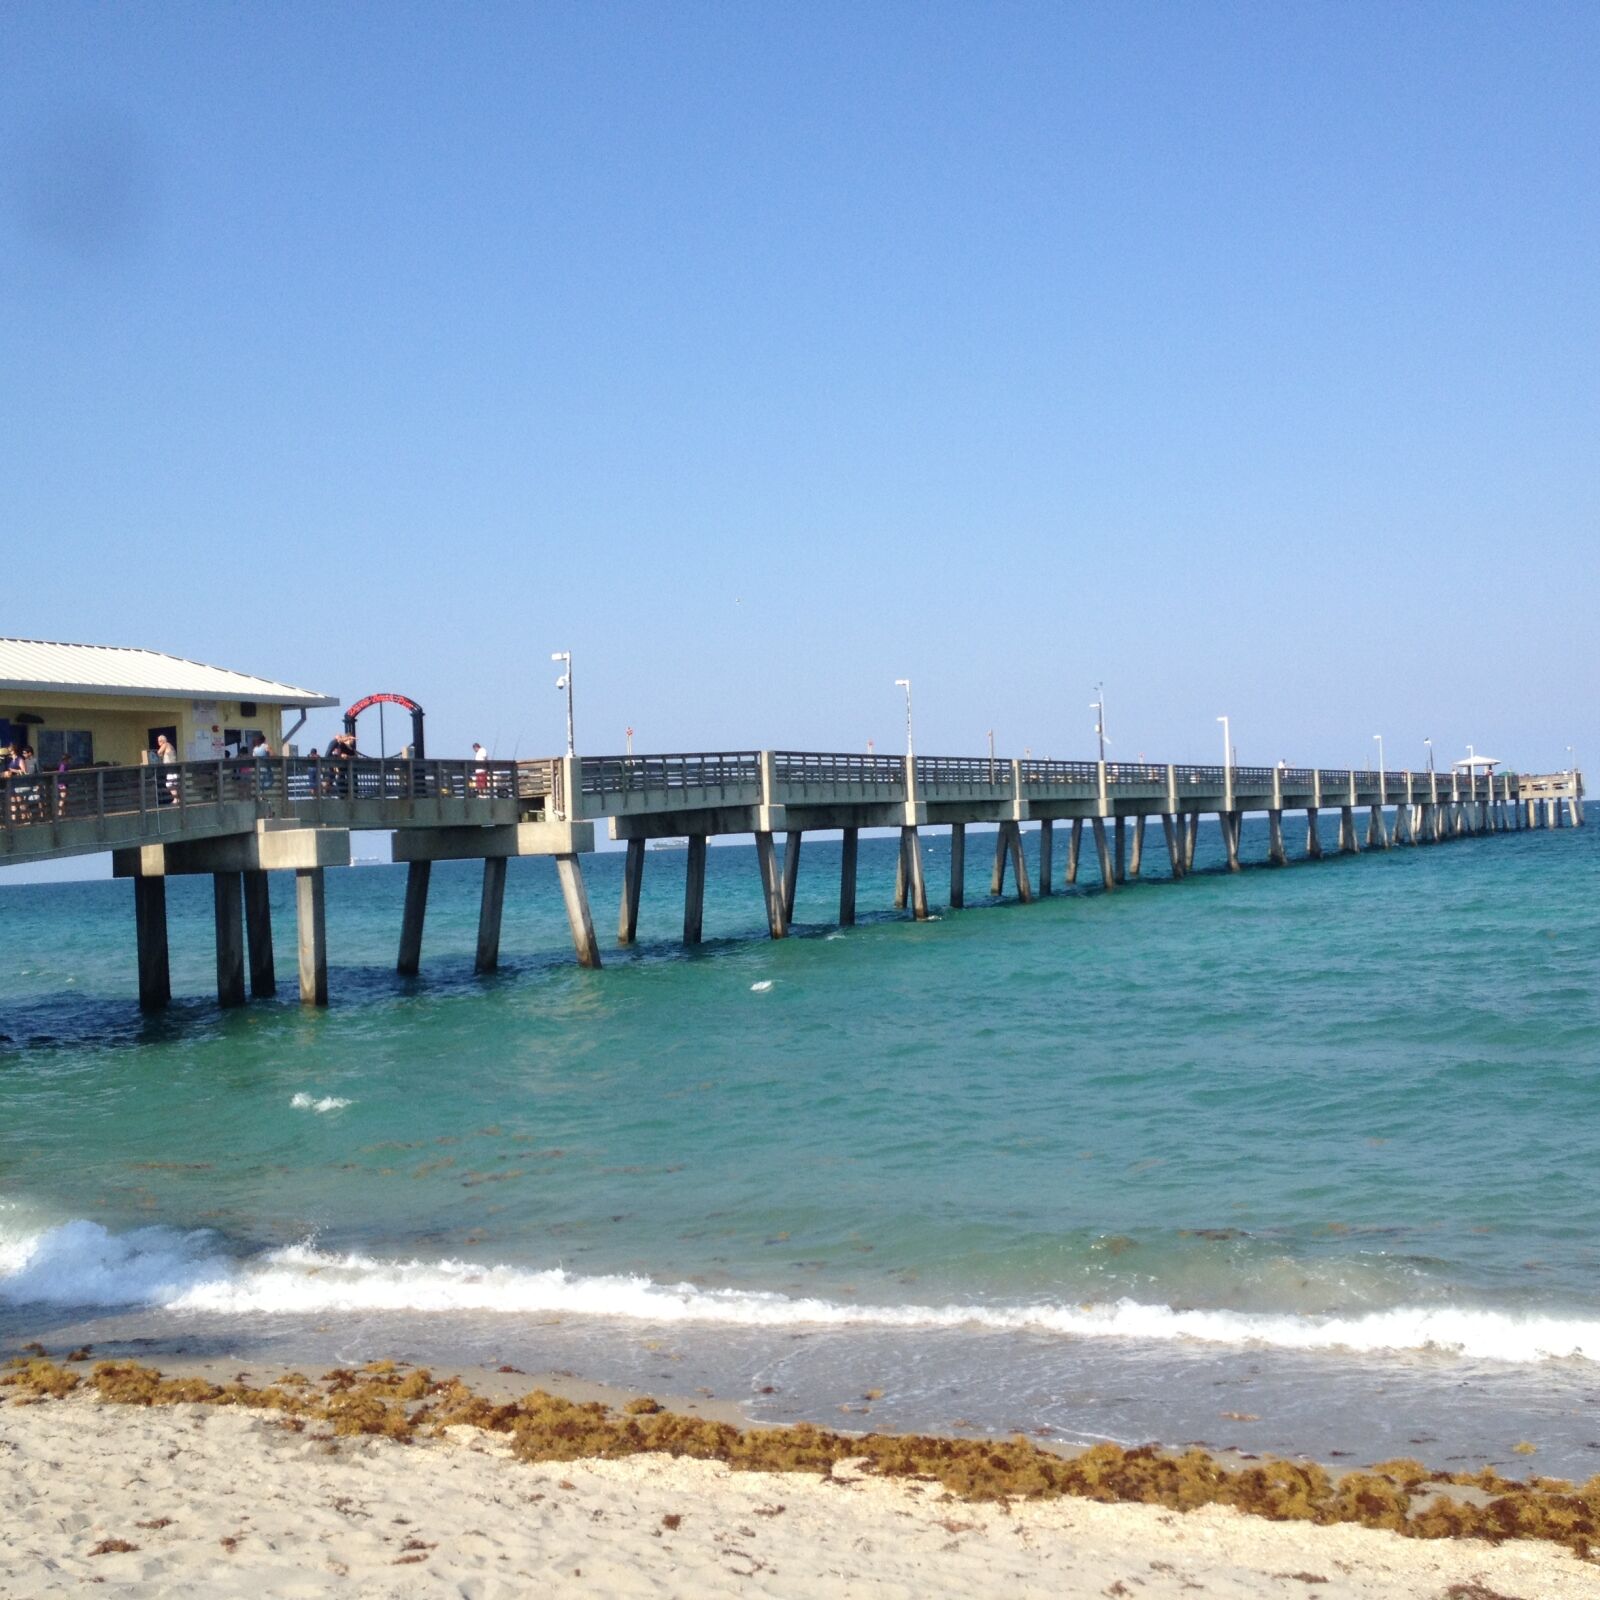 Apple iPhone 4S sample photo. Ocean, pier, vacation photography